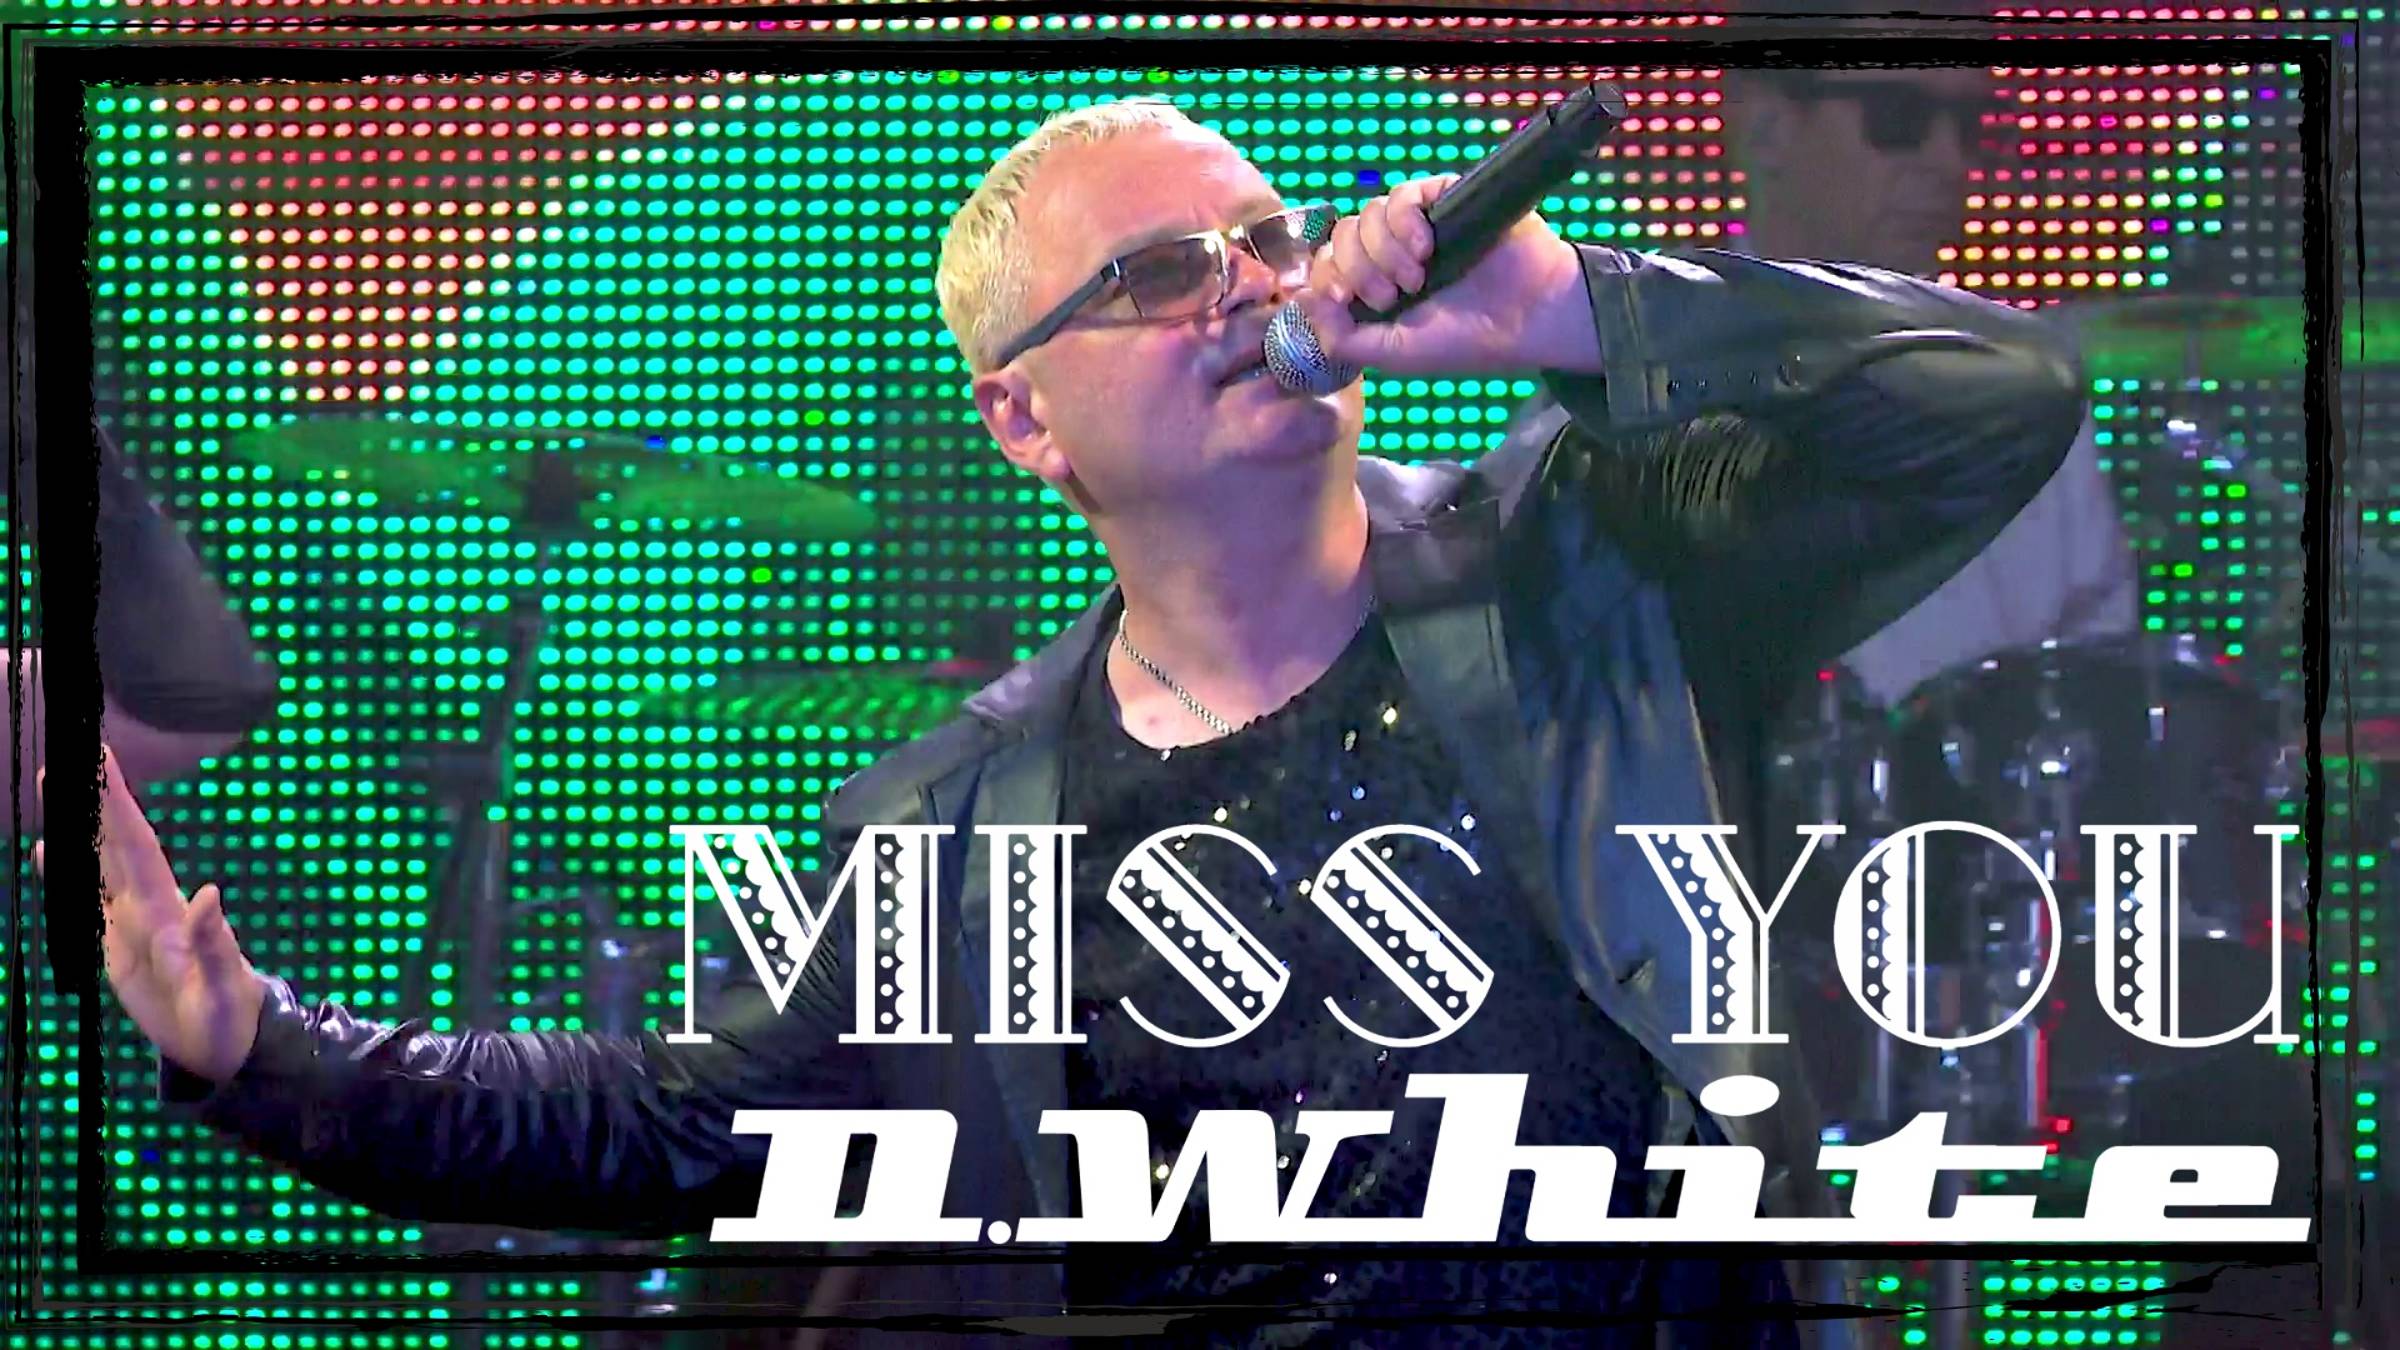 D.White - Miss you (Concert Video). Euro Dance, music 80s-90s, Modern Talking style, NEW Italo Disco